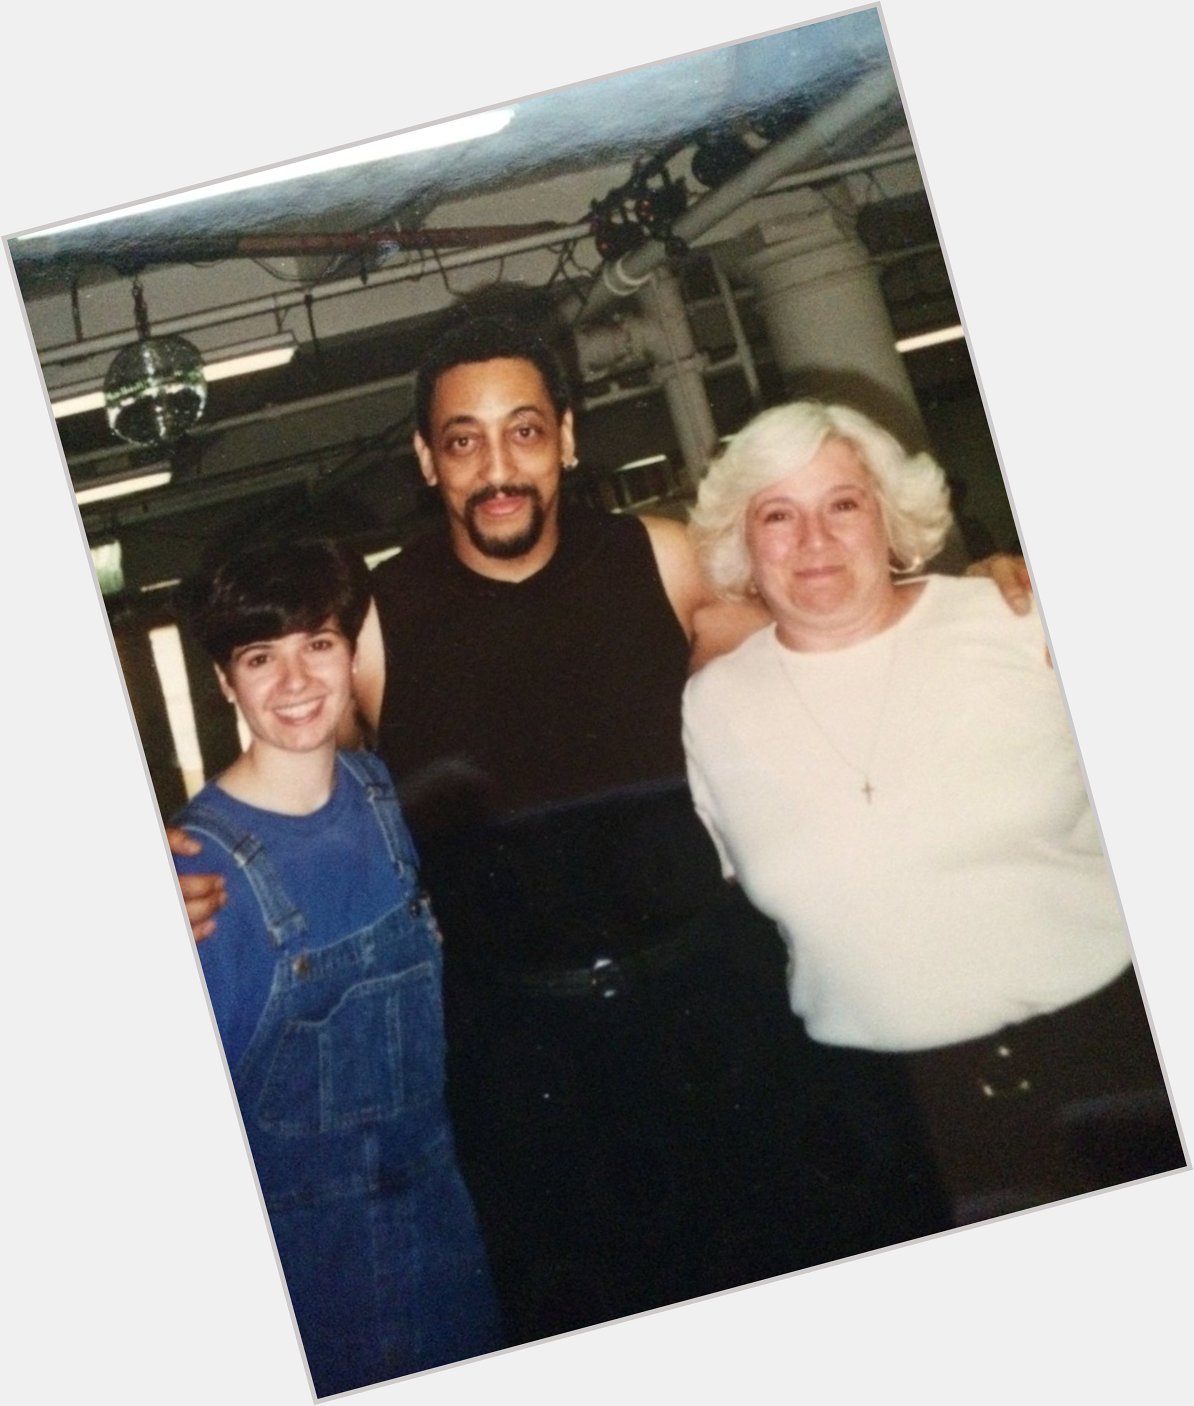 Throwback - my mother & I circa 1998
Happy Birthday Gregory Hines!   